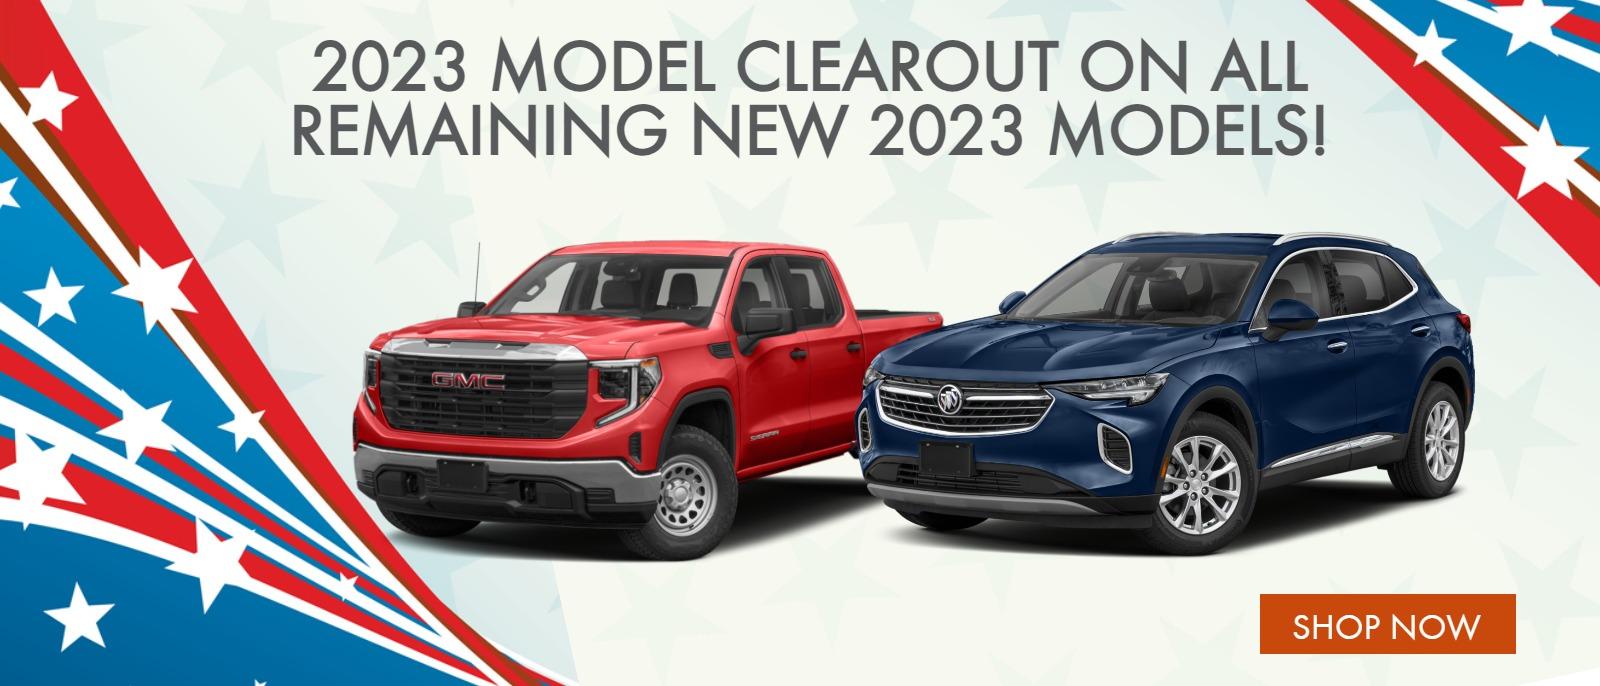 2023 Model Clearout on all remaining new 2023 Models!